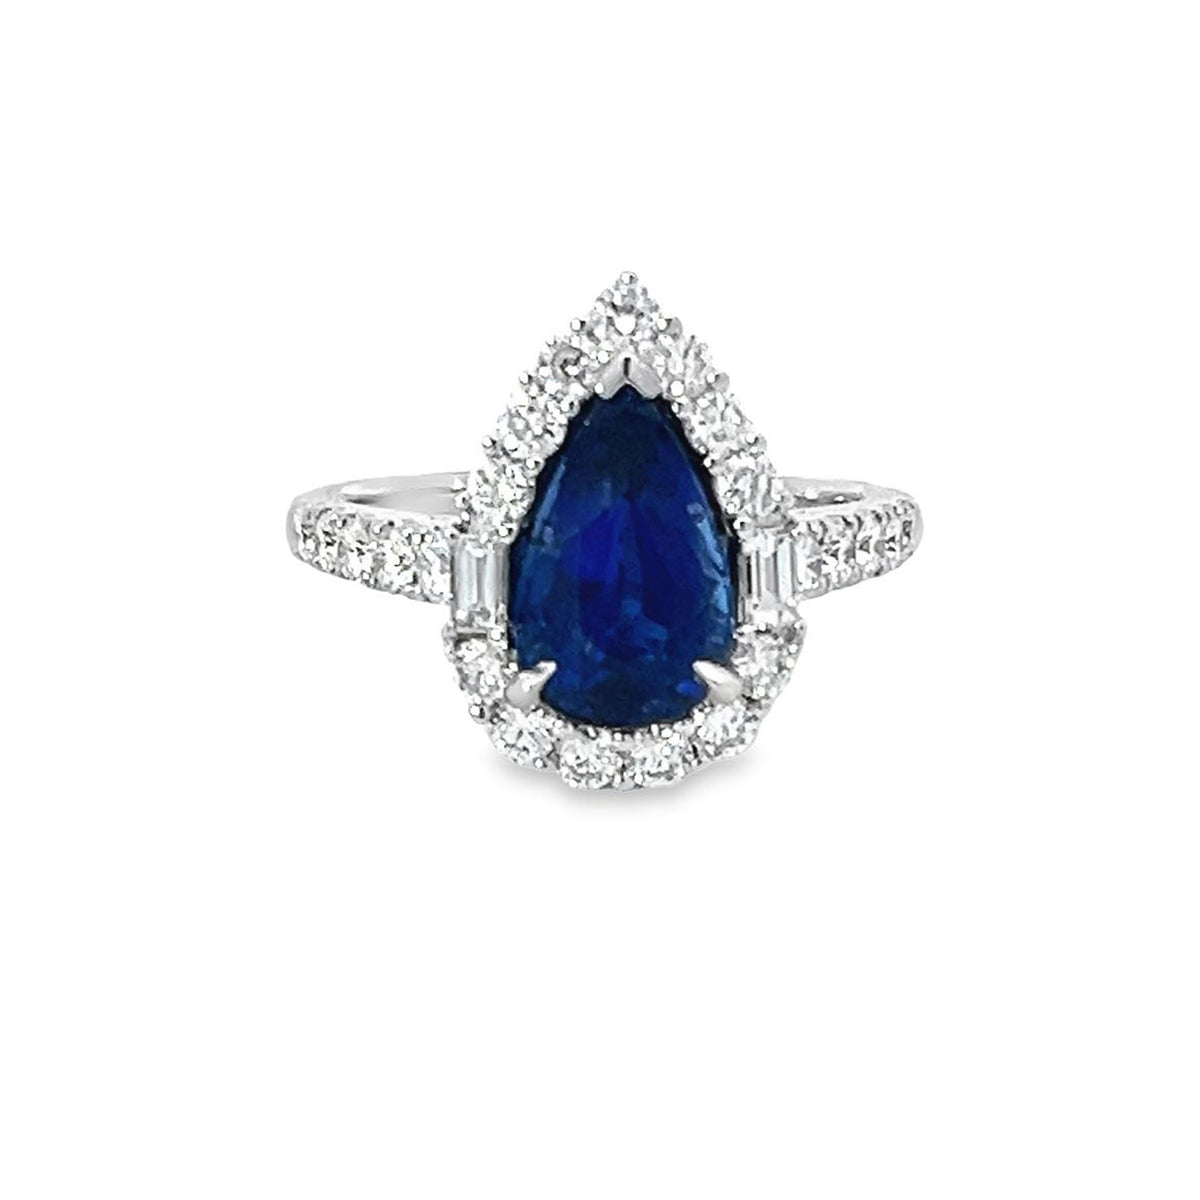 18Kt White Gold Halo Ring With 2.56ct Pear-Shape Fine Blue Sapphire